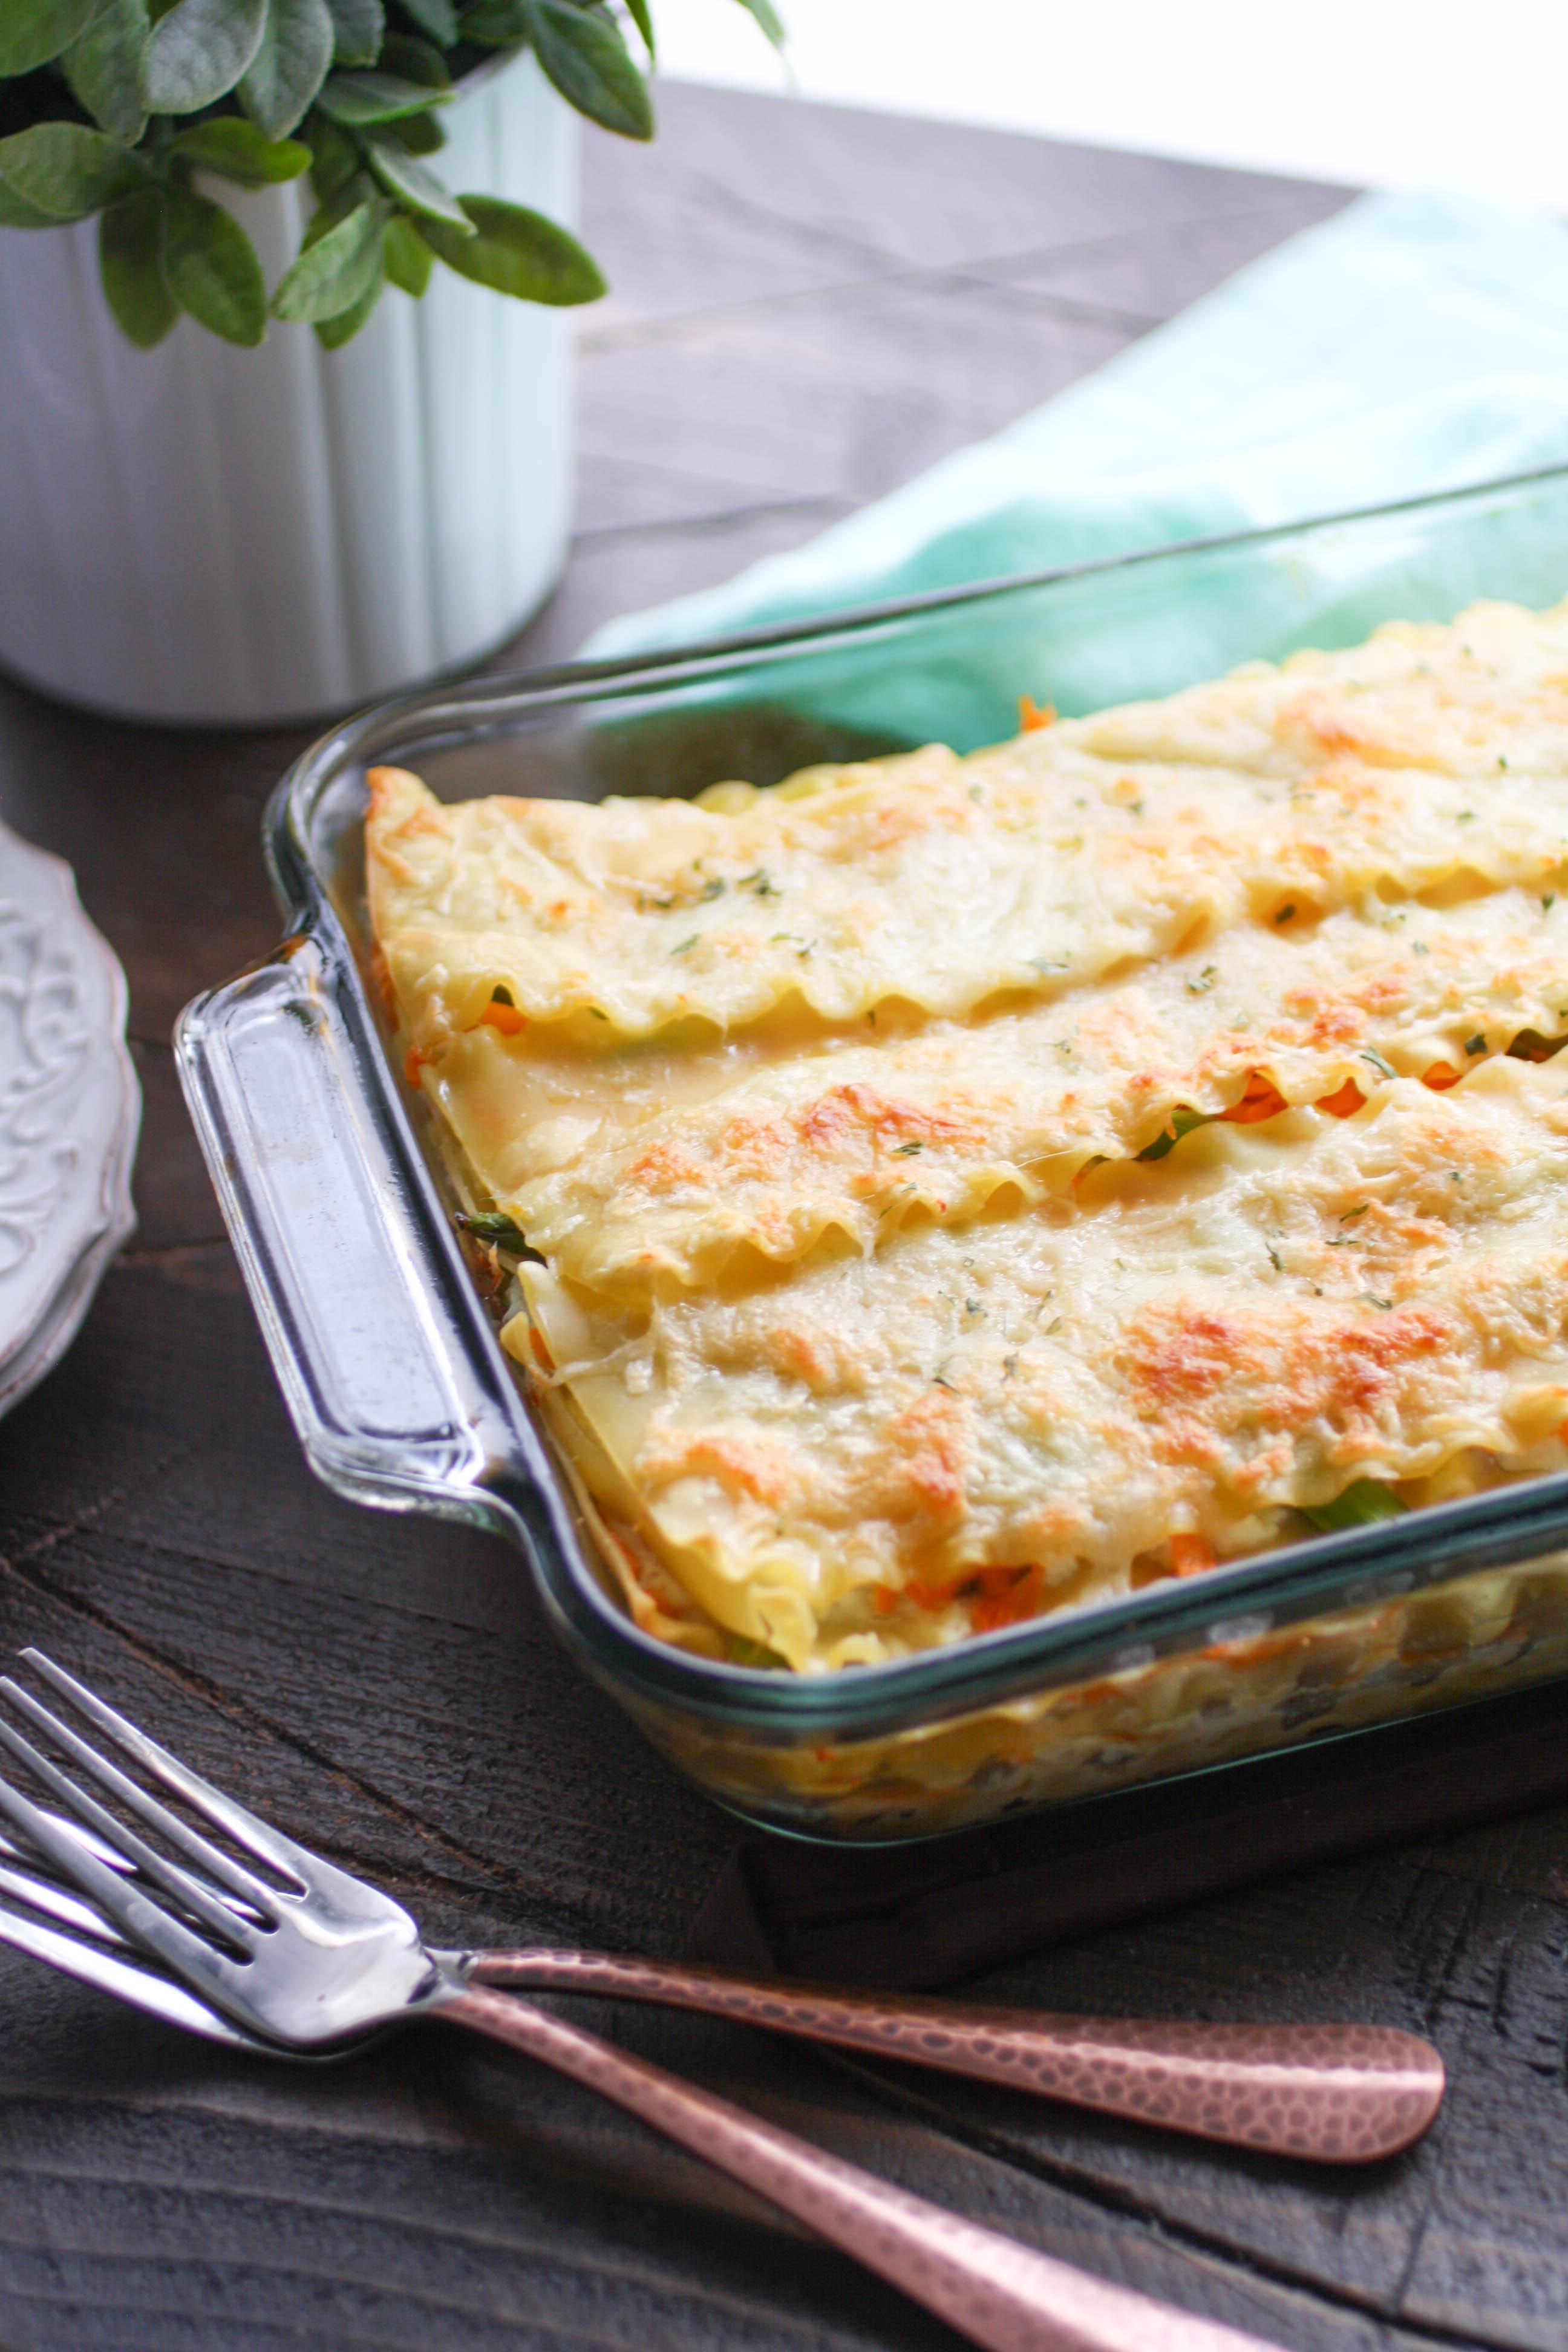 Asparagus and Sweet Potato Lasagna is a dish you should make soon. You'll love how creamy and flavorful this Asparagus and Sweet Potato Lasagna is!